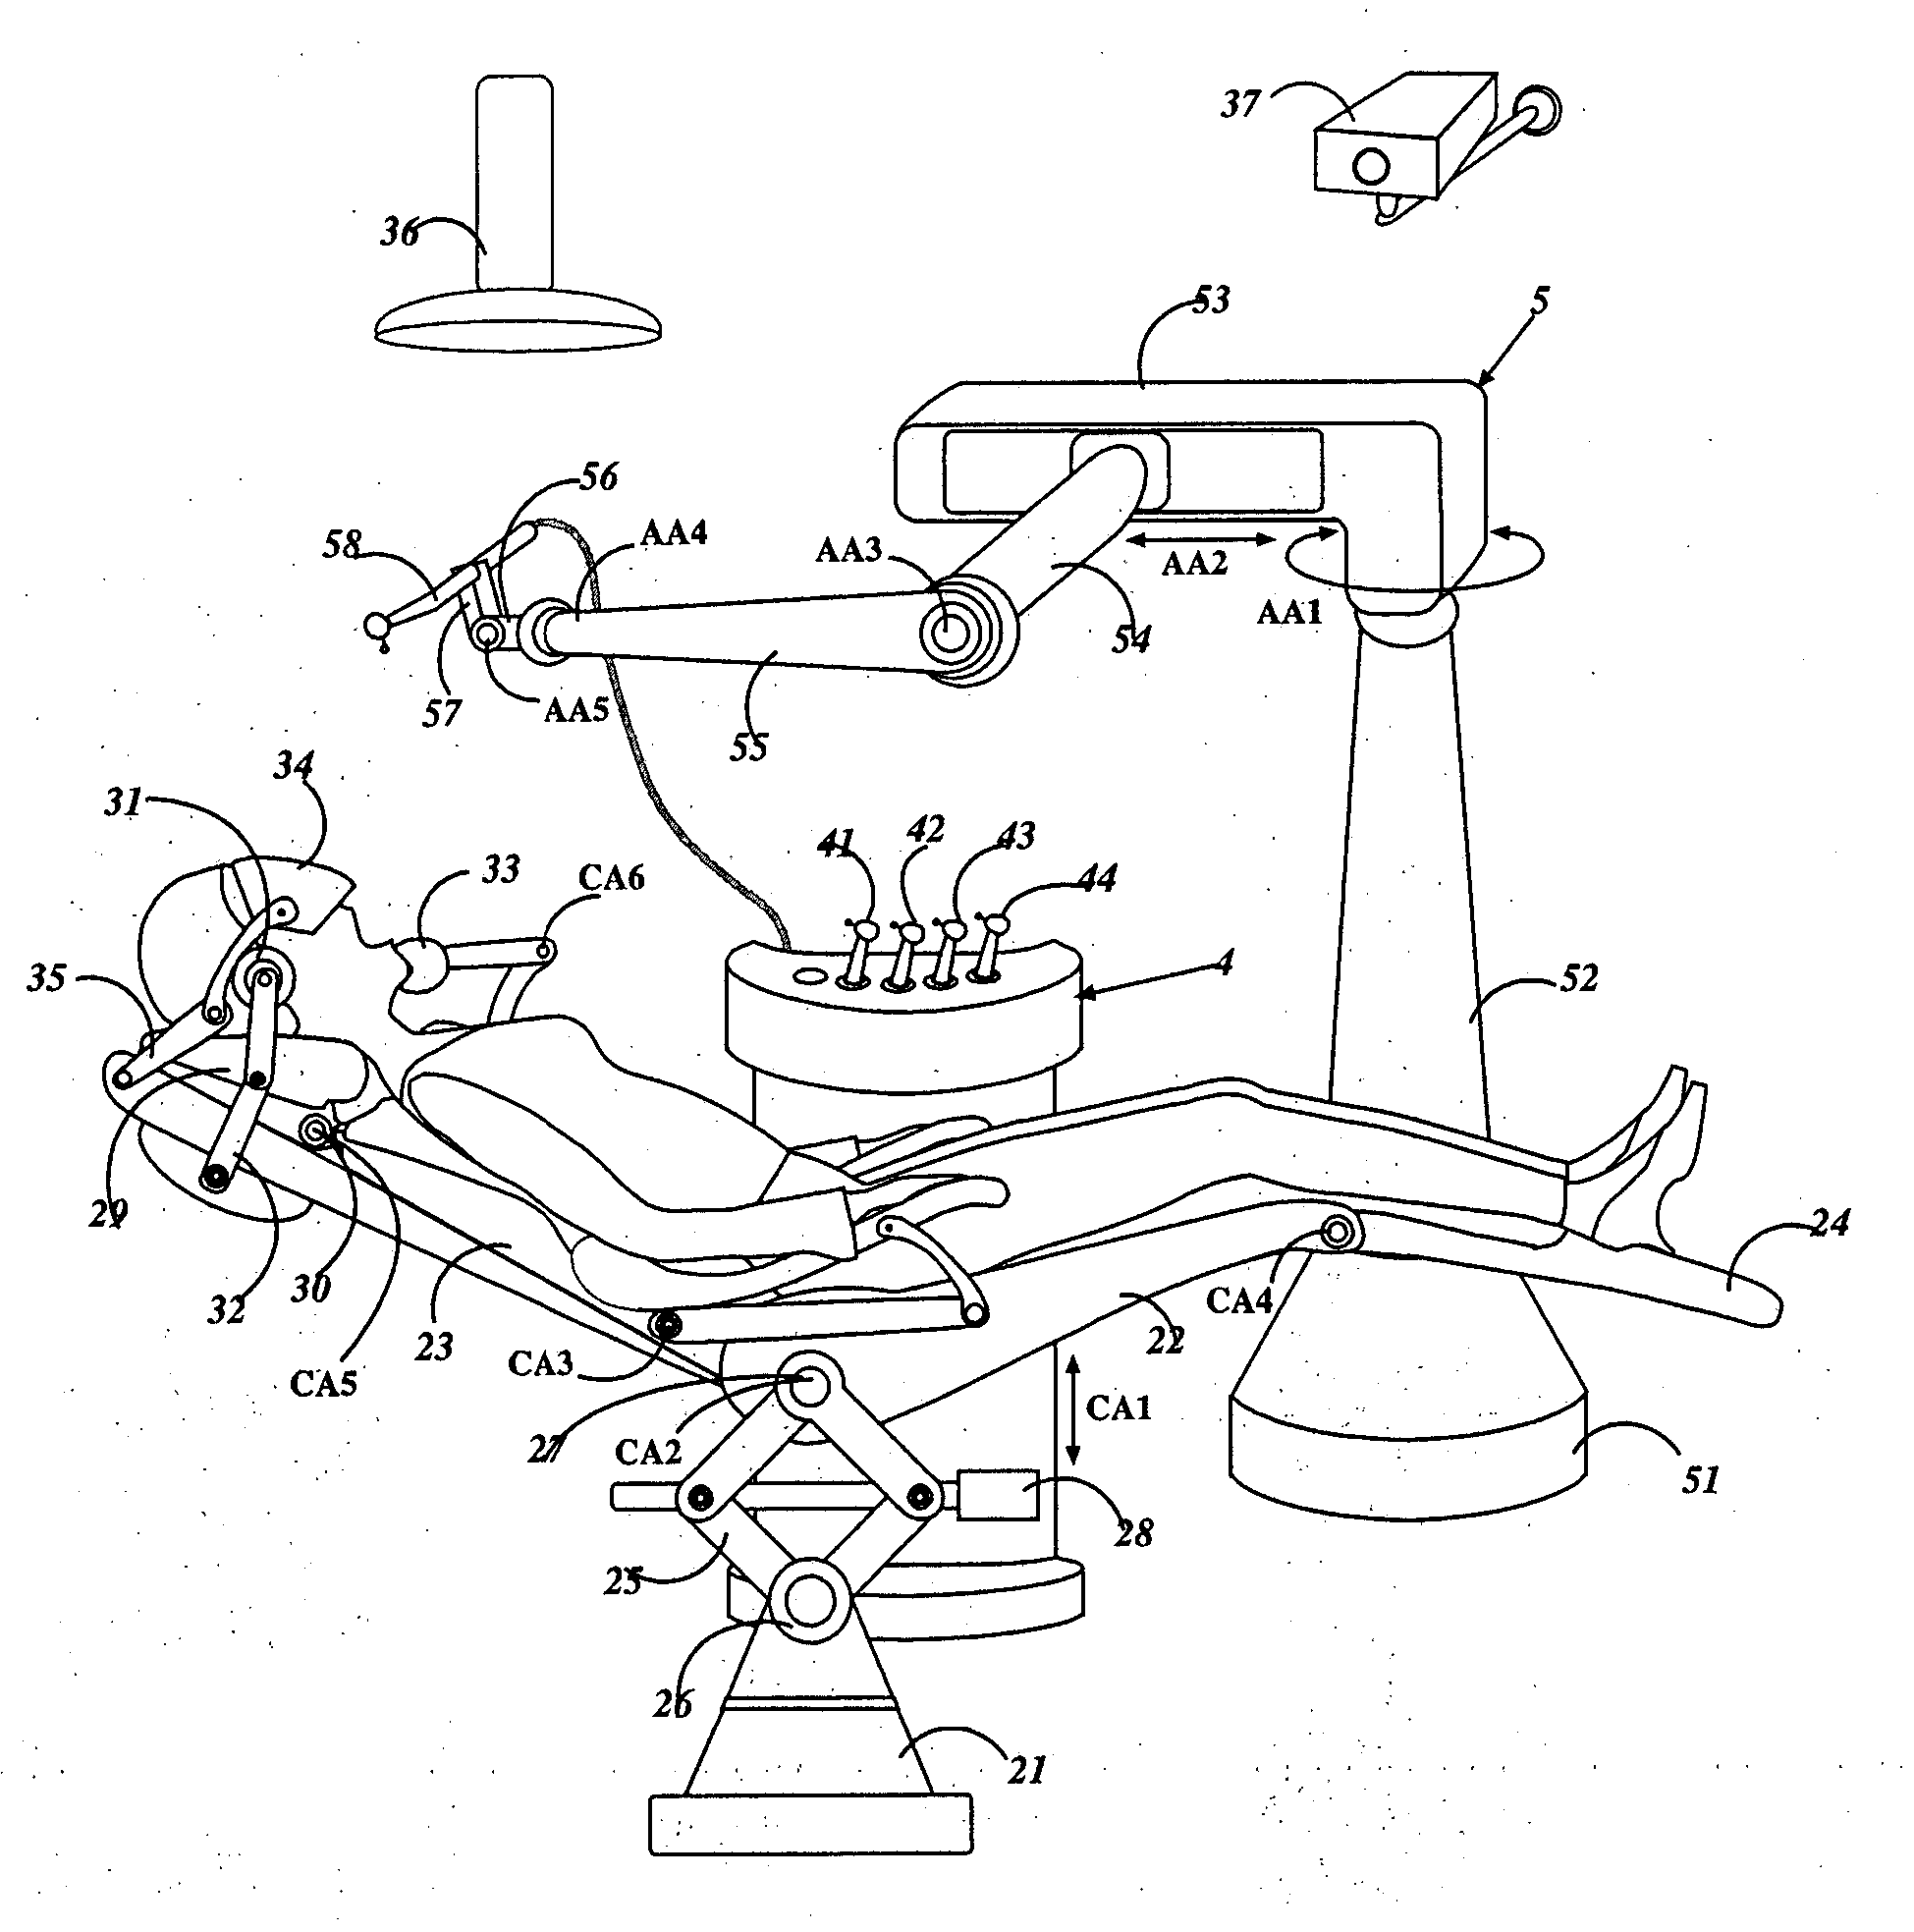 Computer-controlled dental treatment system and method